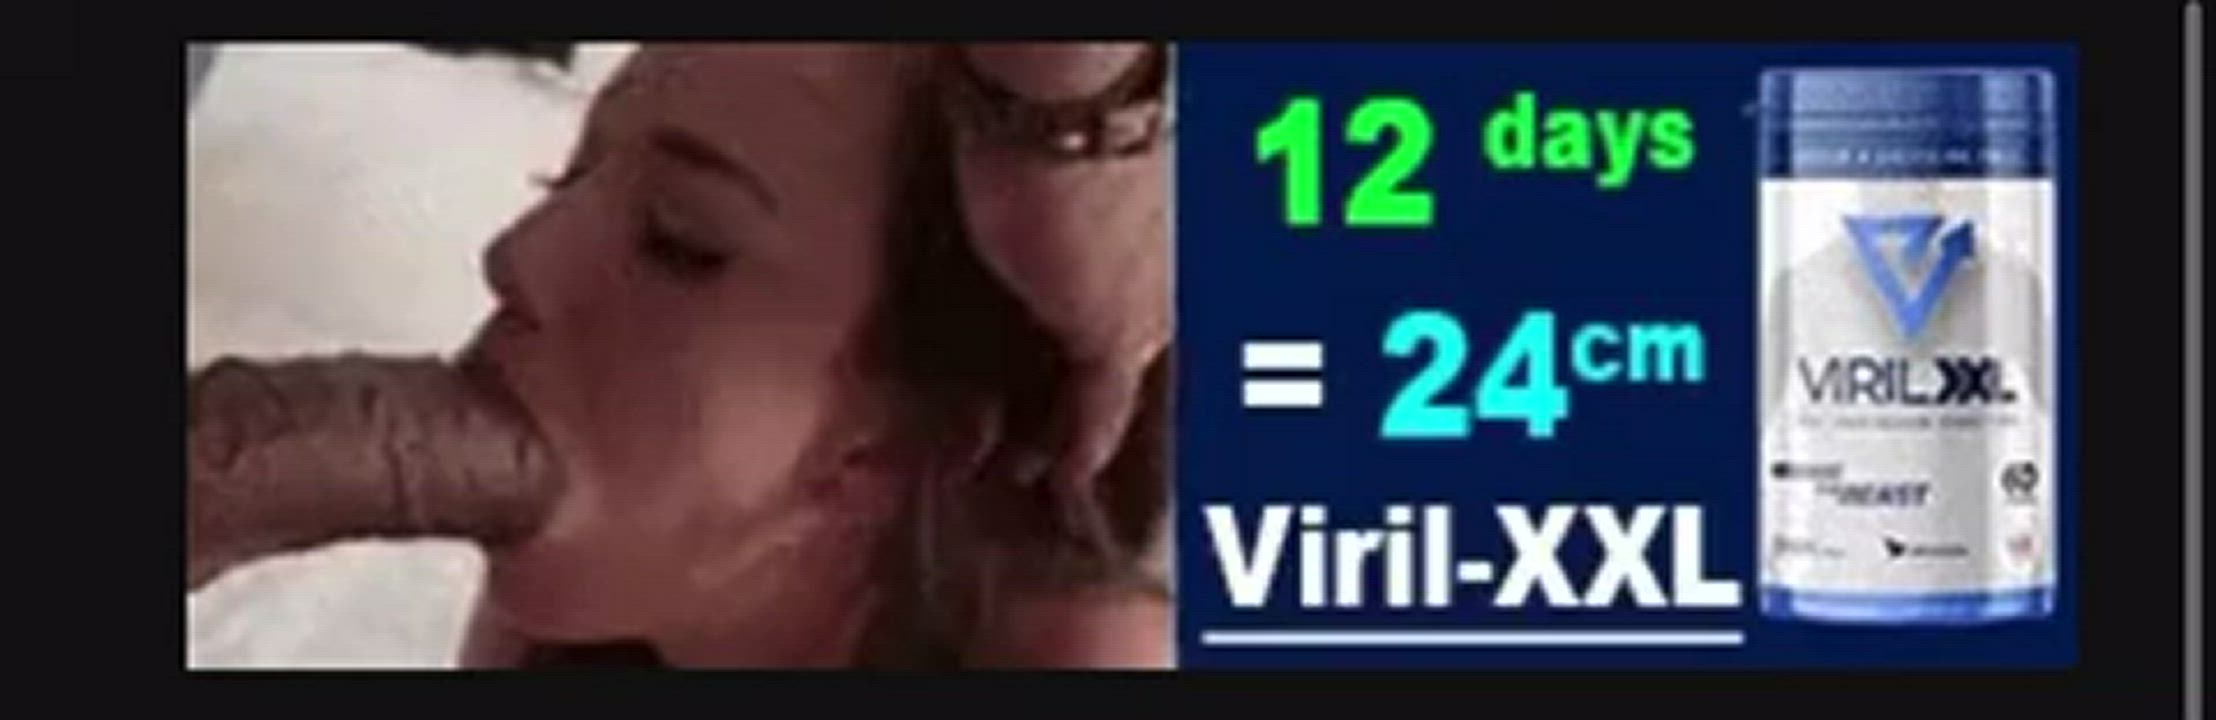 Who is it or what video? Viralxxl ad on xnxx